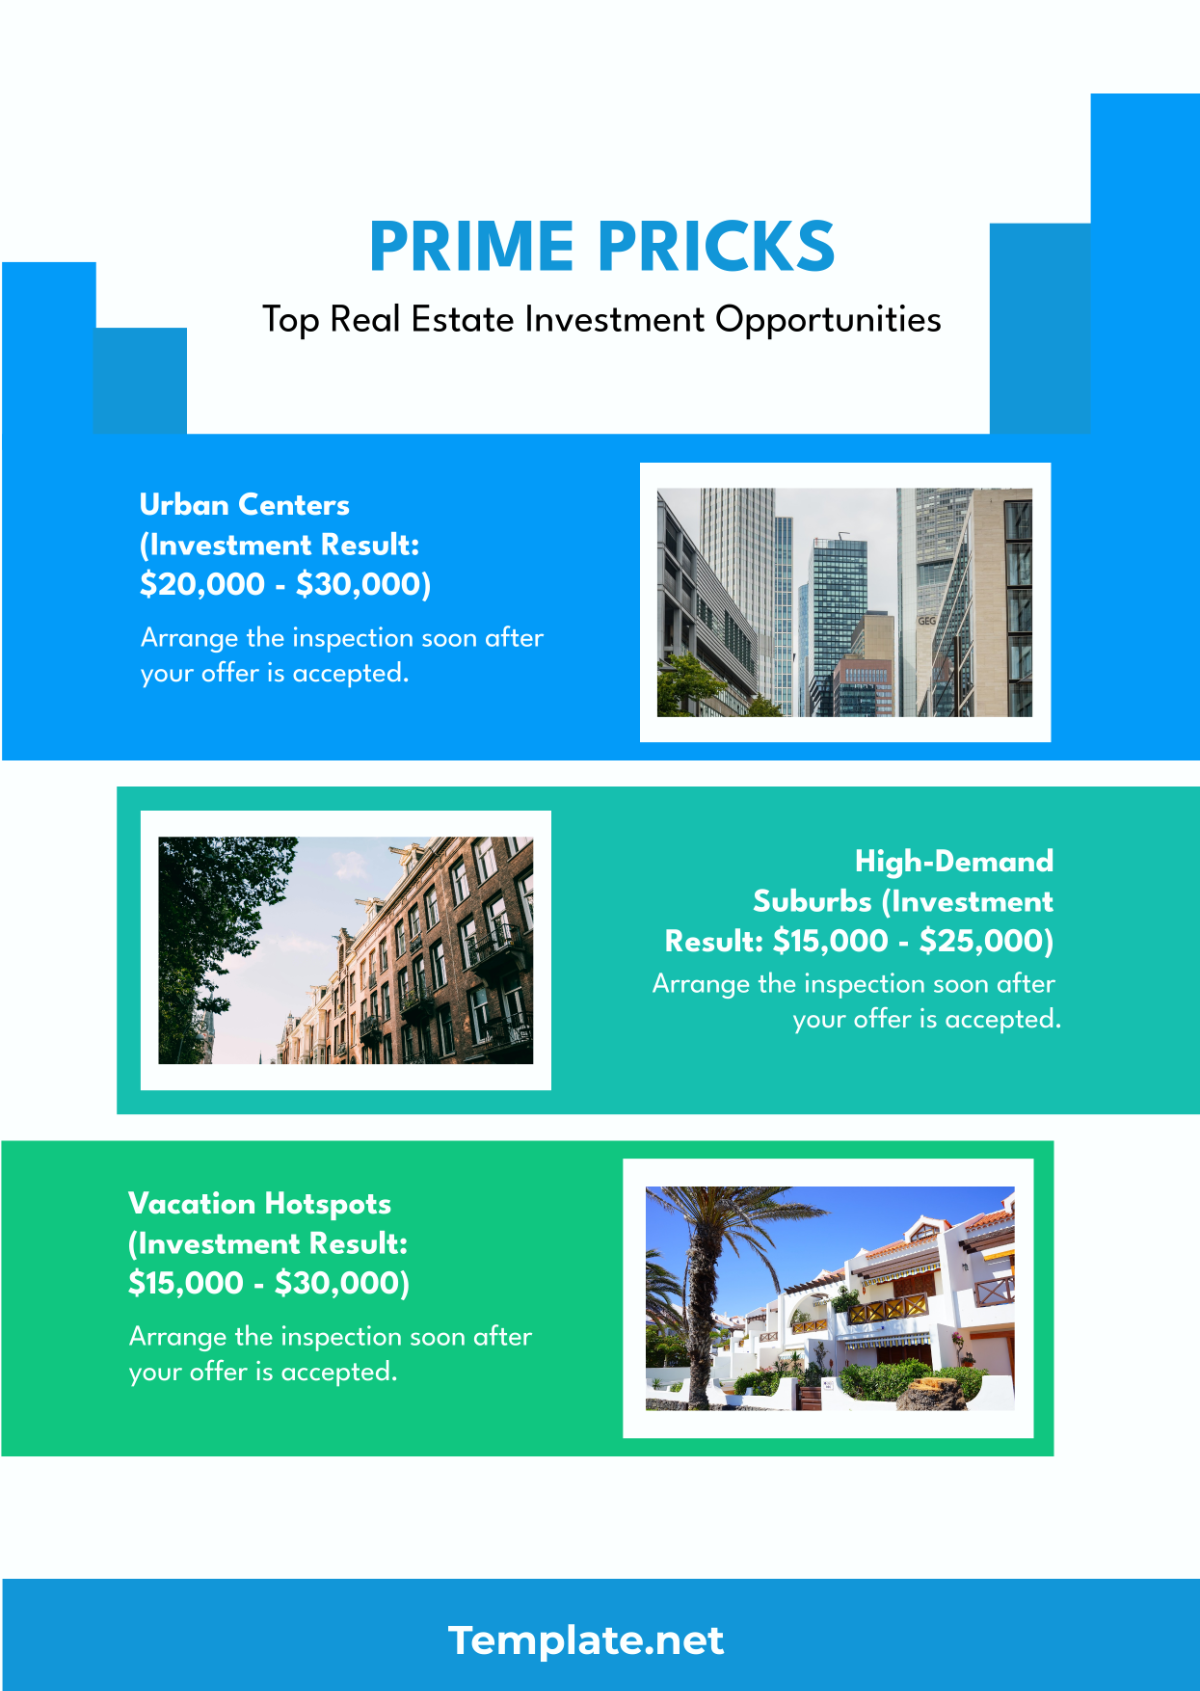 Real Estate Best Places To Invest Infographic Template